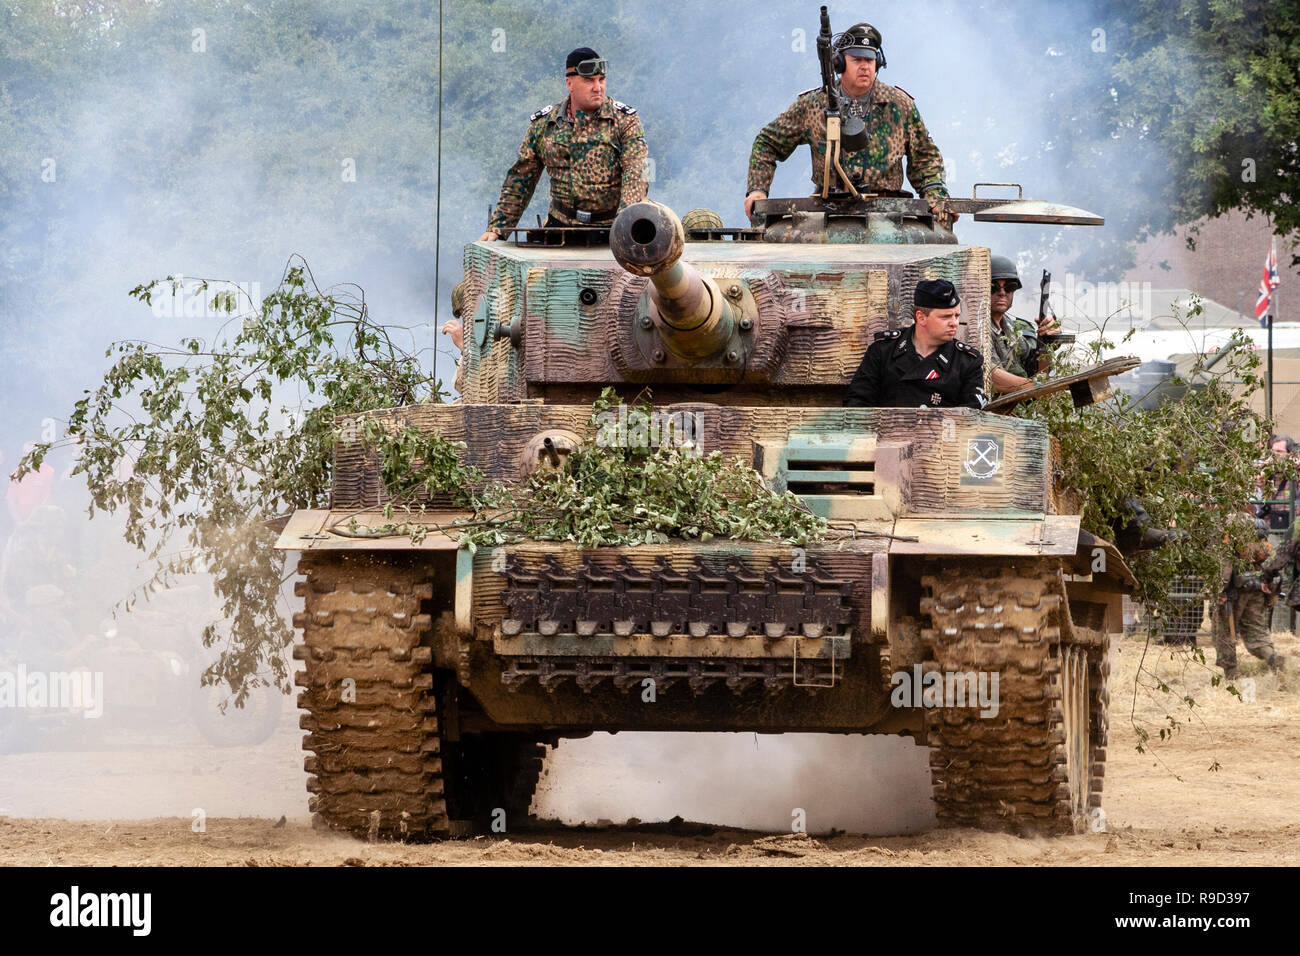 https://c8.alamy.com/comp/R9D397/re-enactment-war-and-peace-show-german-tiger-tank-approaching-at-speed-with-tank-commander-in-turret-motion-blur-on-tracks-dust-behind-tank-R9D397.jpg